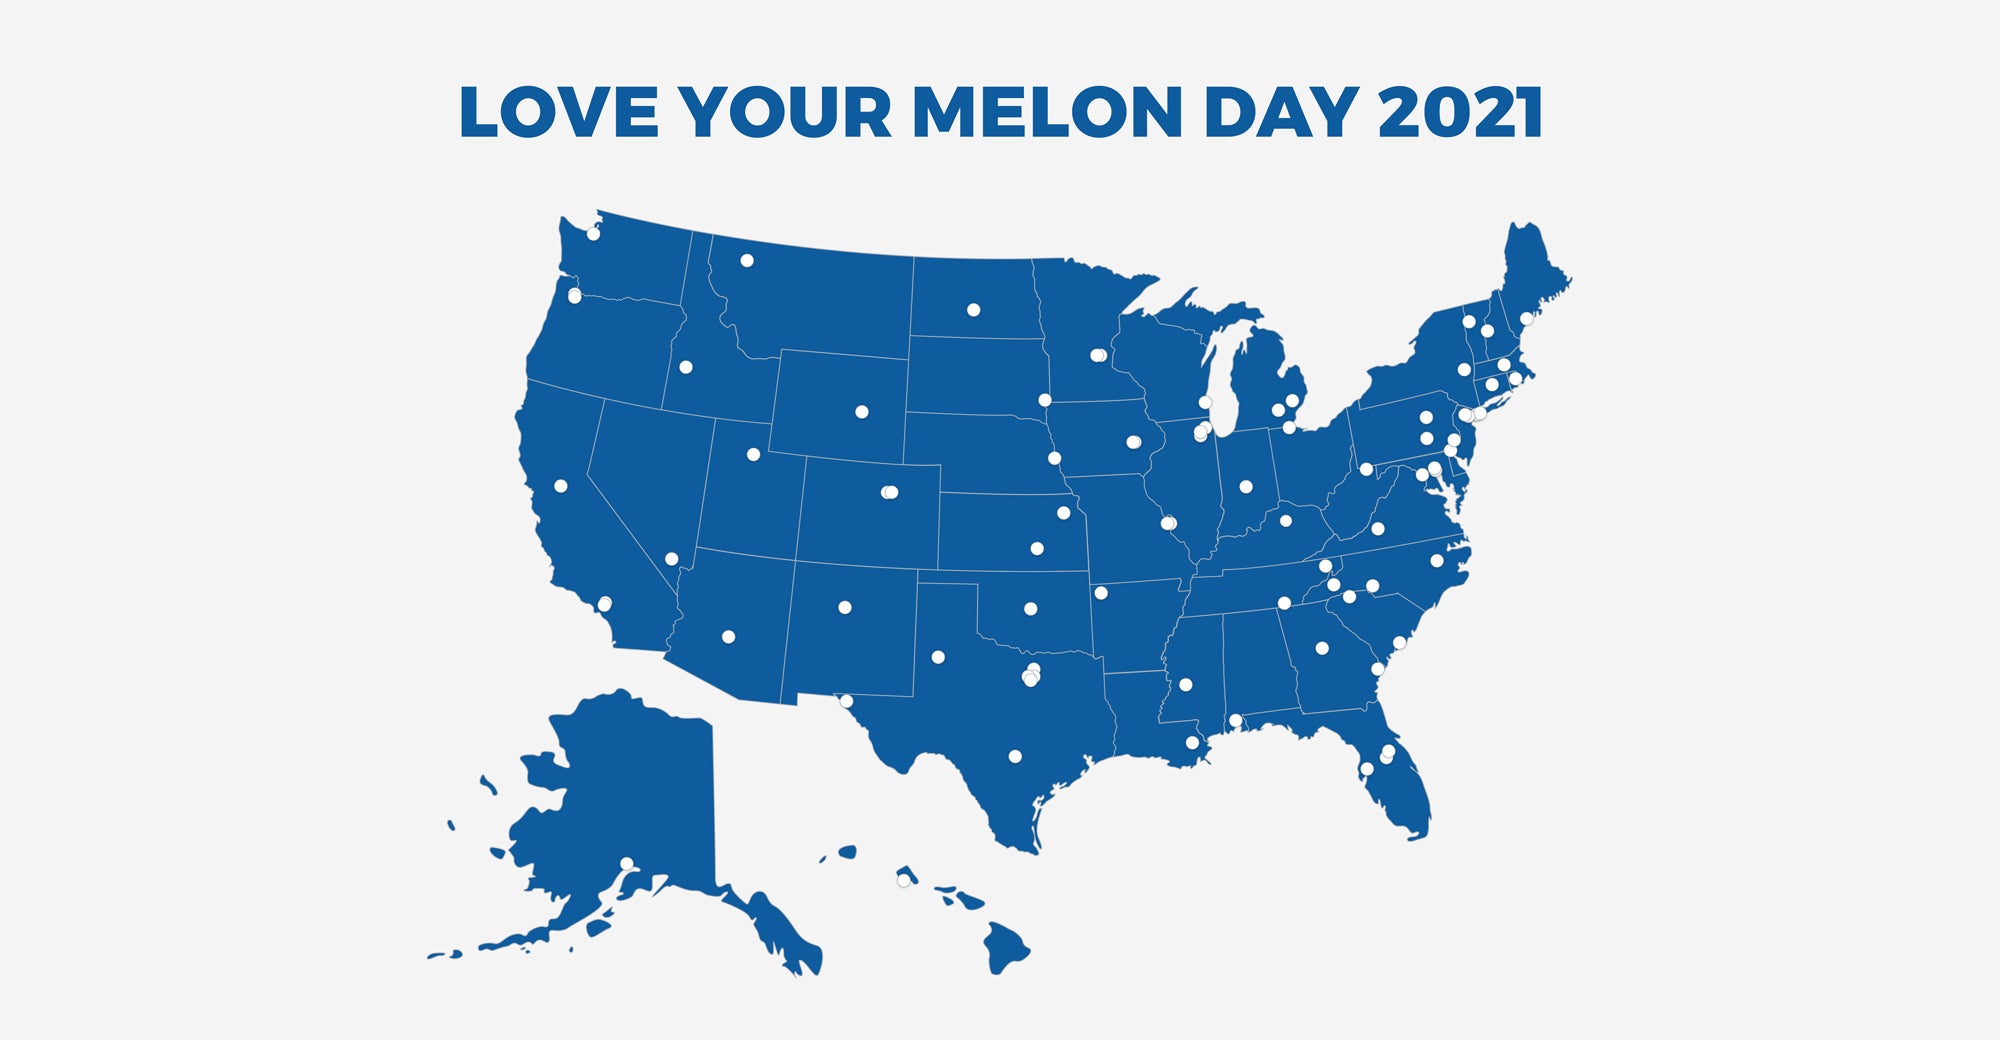 LOVE YOUR MELON DAY 2021